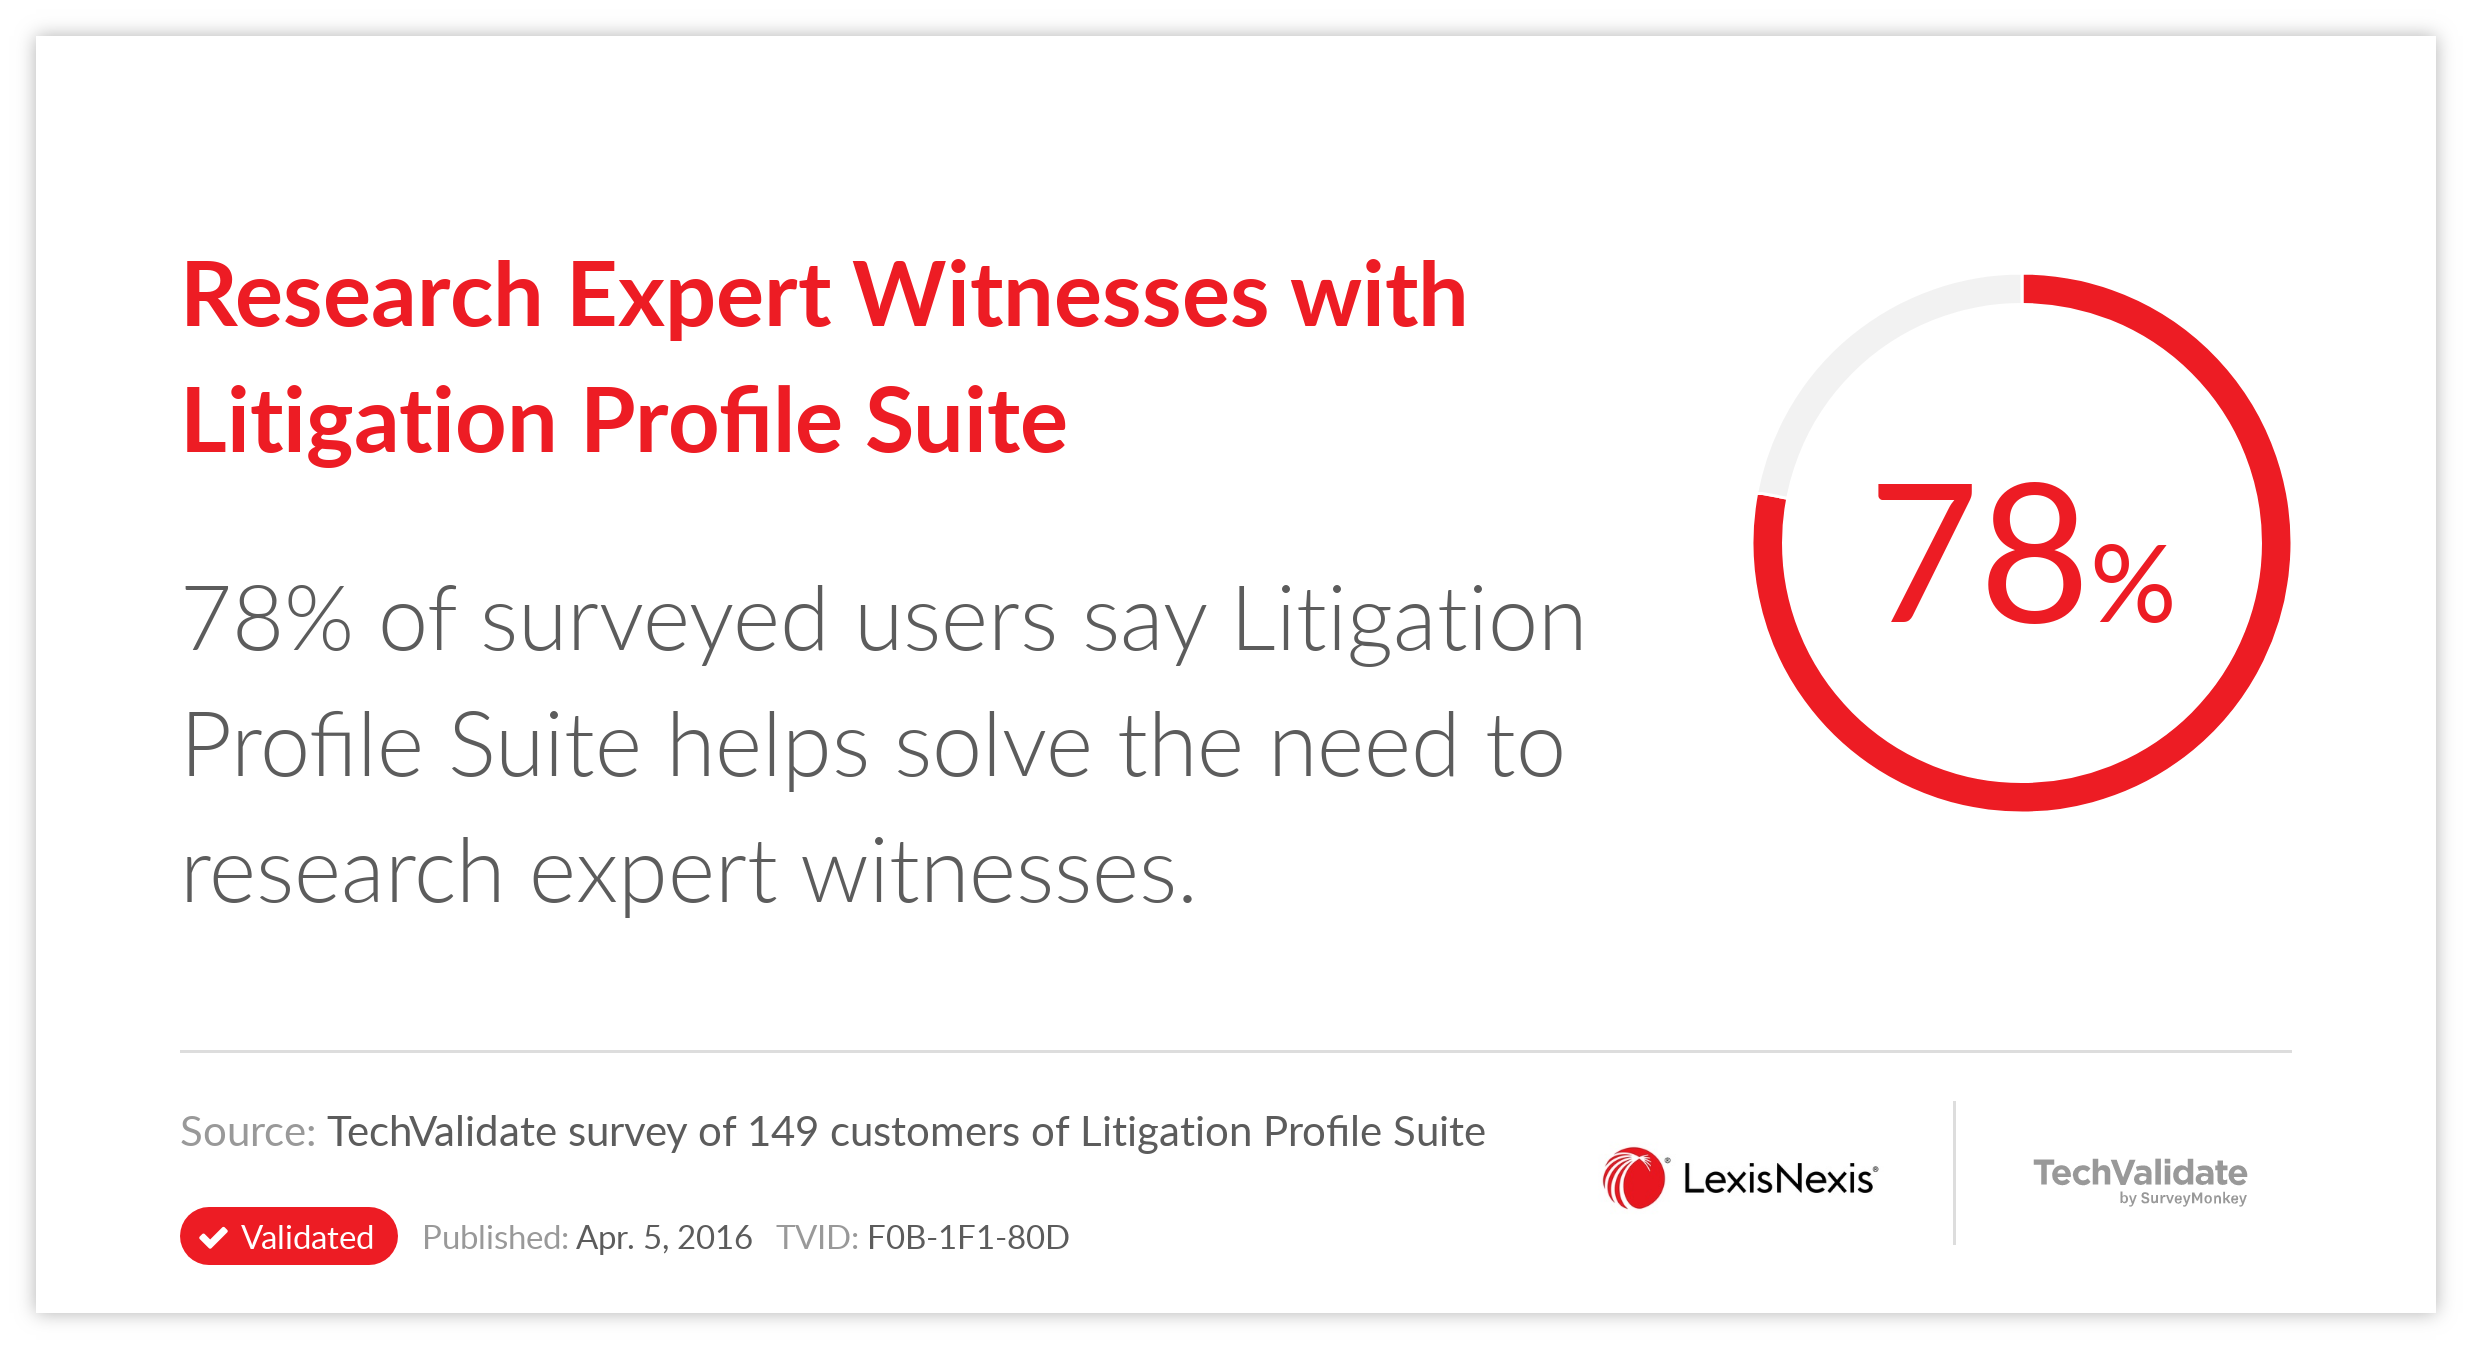 Research Expert Witnesses with Litigation Profile Suite